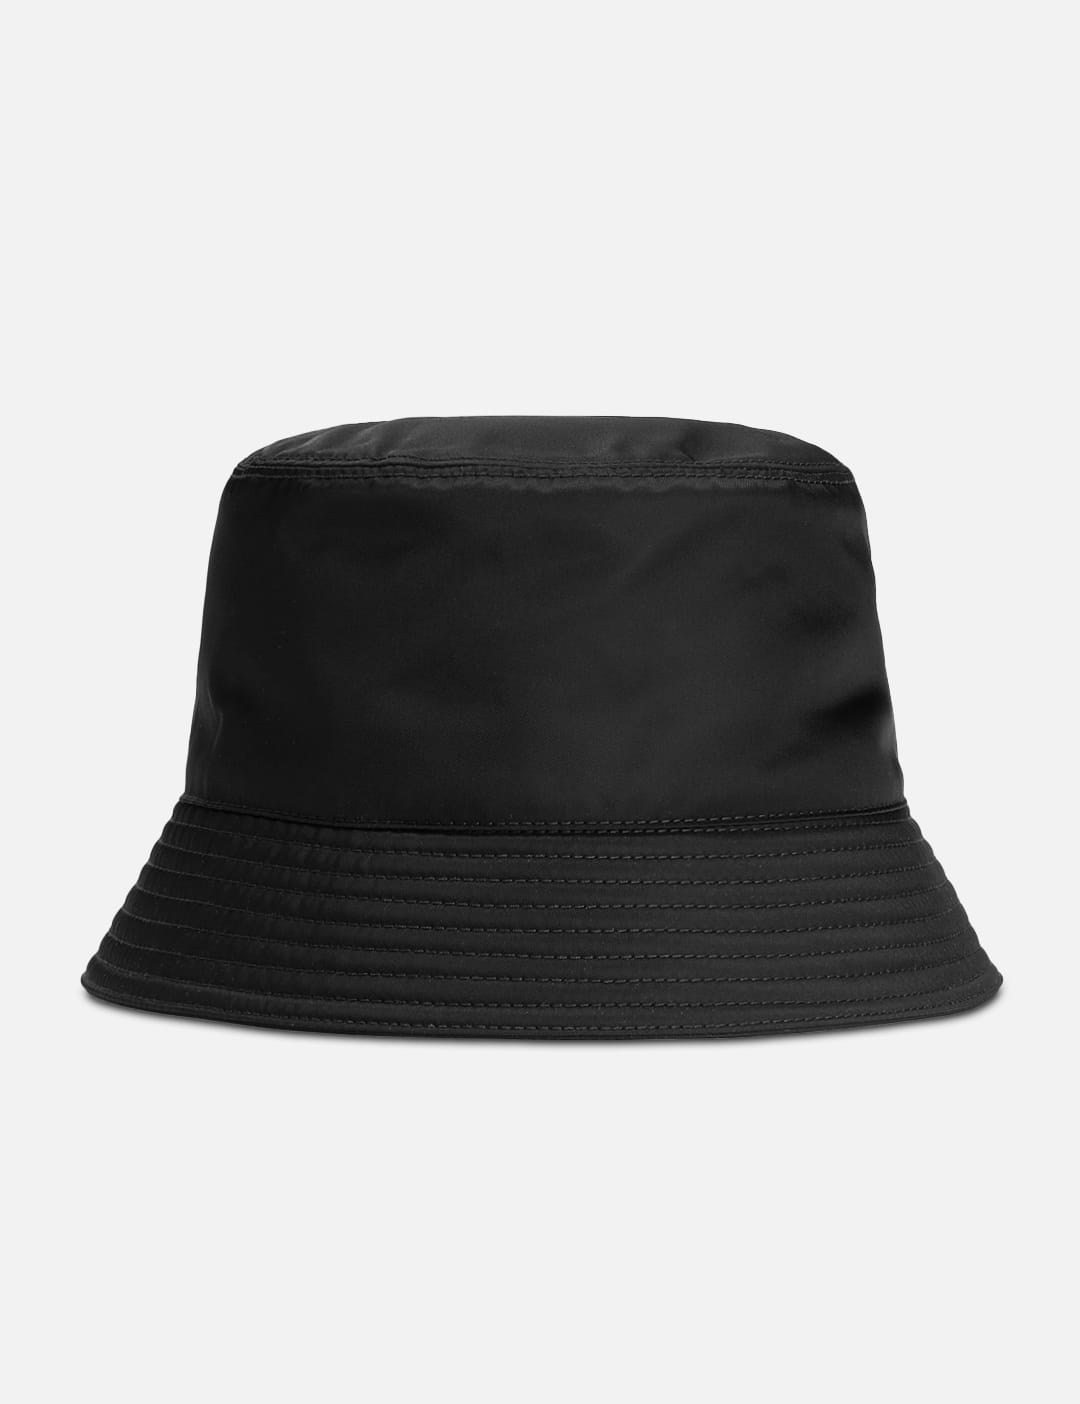 Prada - RE-NYLON BUCKET HAT | HBX - Globally Curated Fashion and